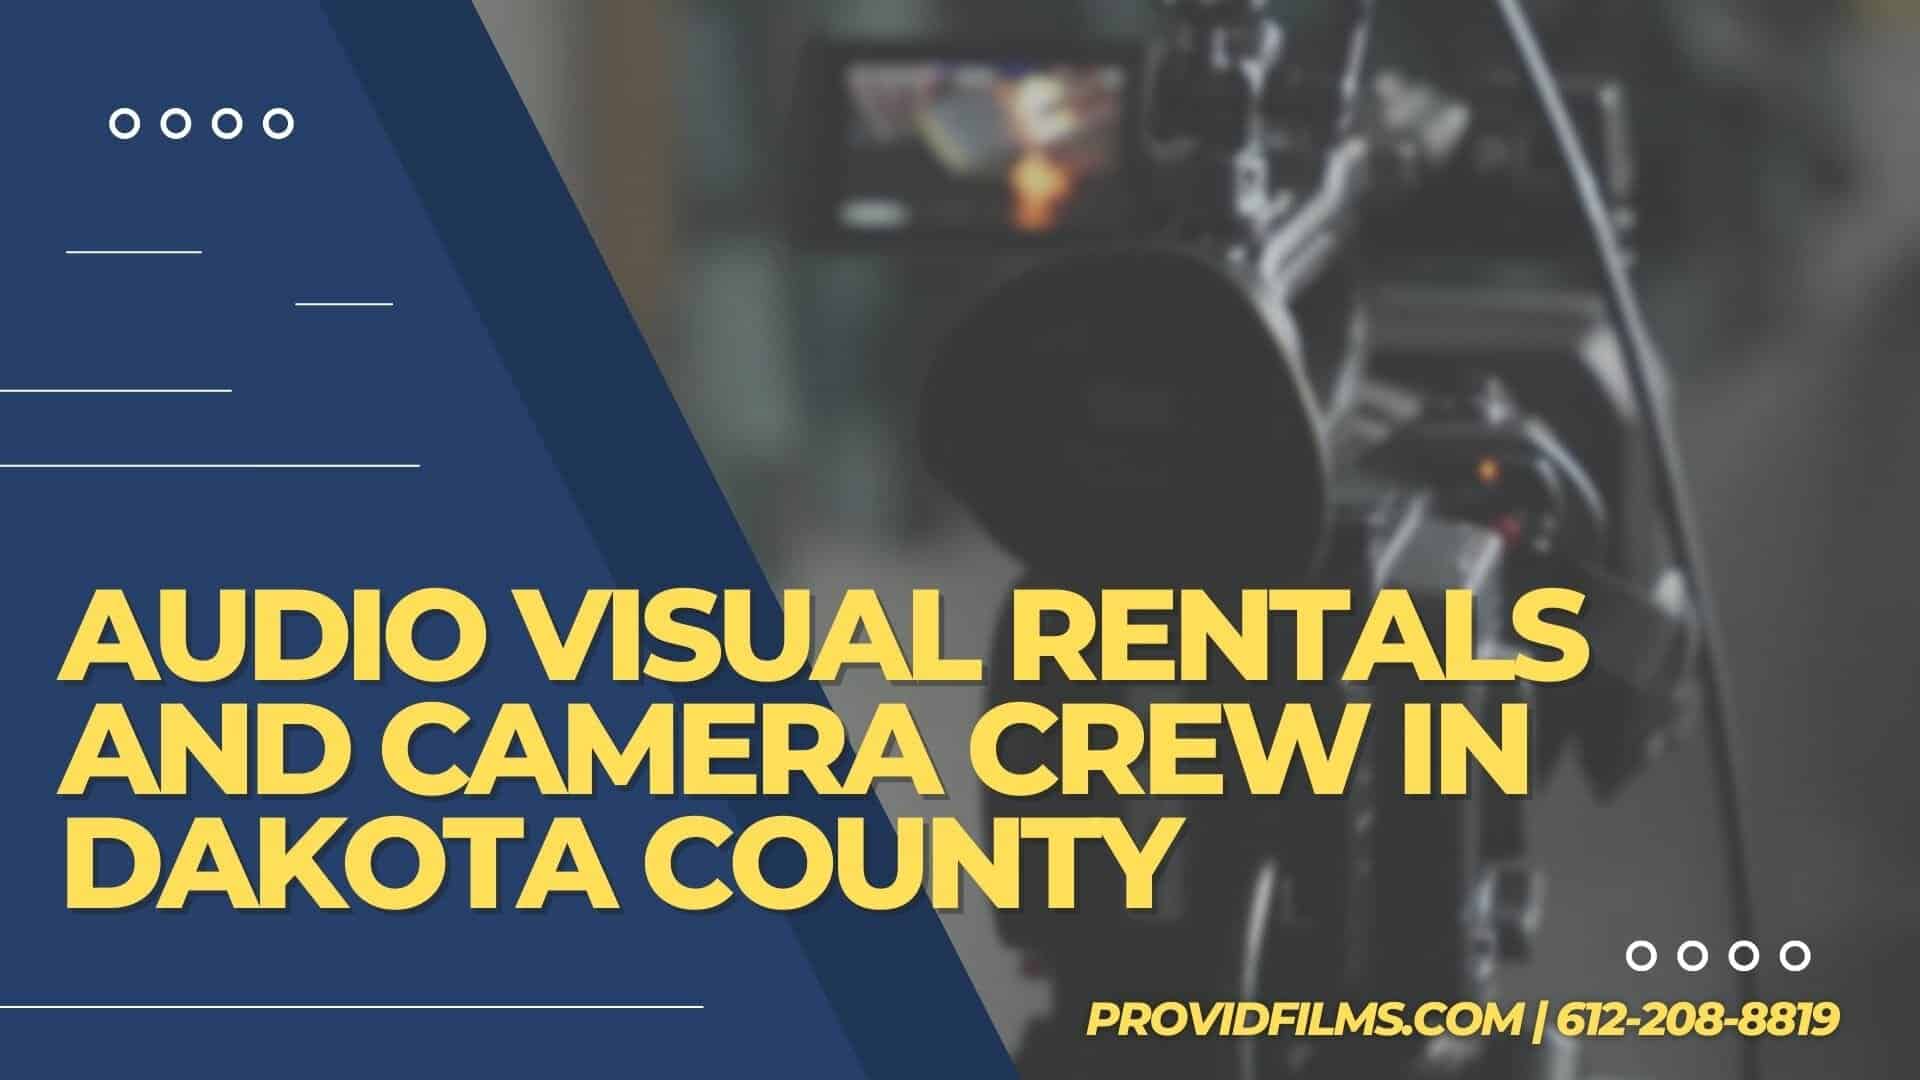 Graphic with a video camera crew with the text saying "AV Rental and Camera Crew in Dakota County"